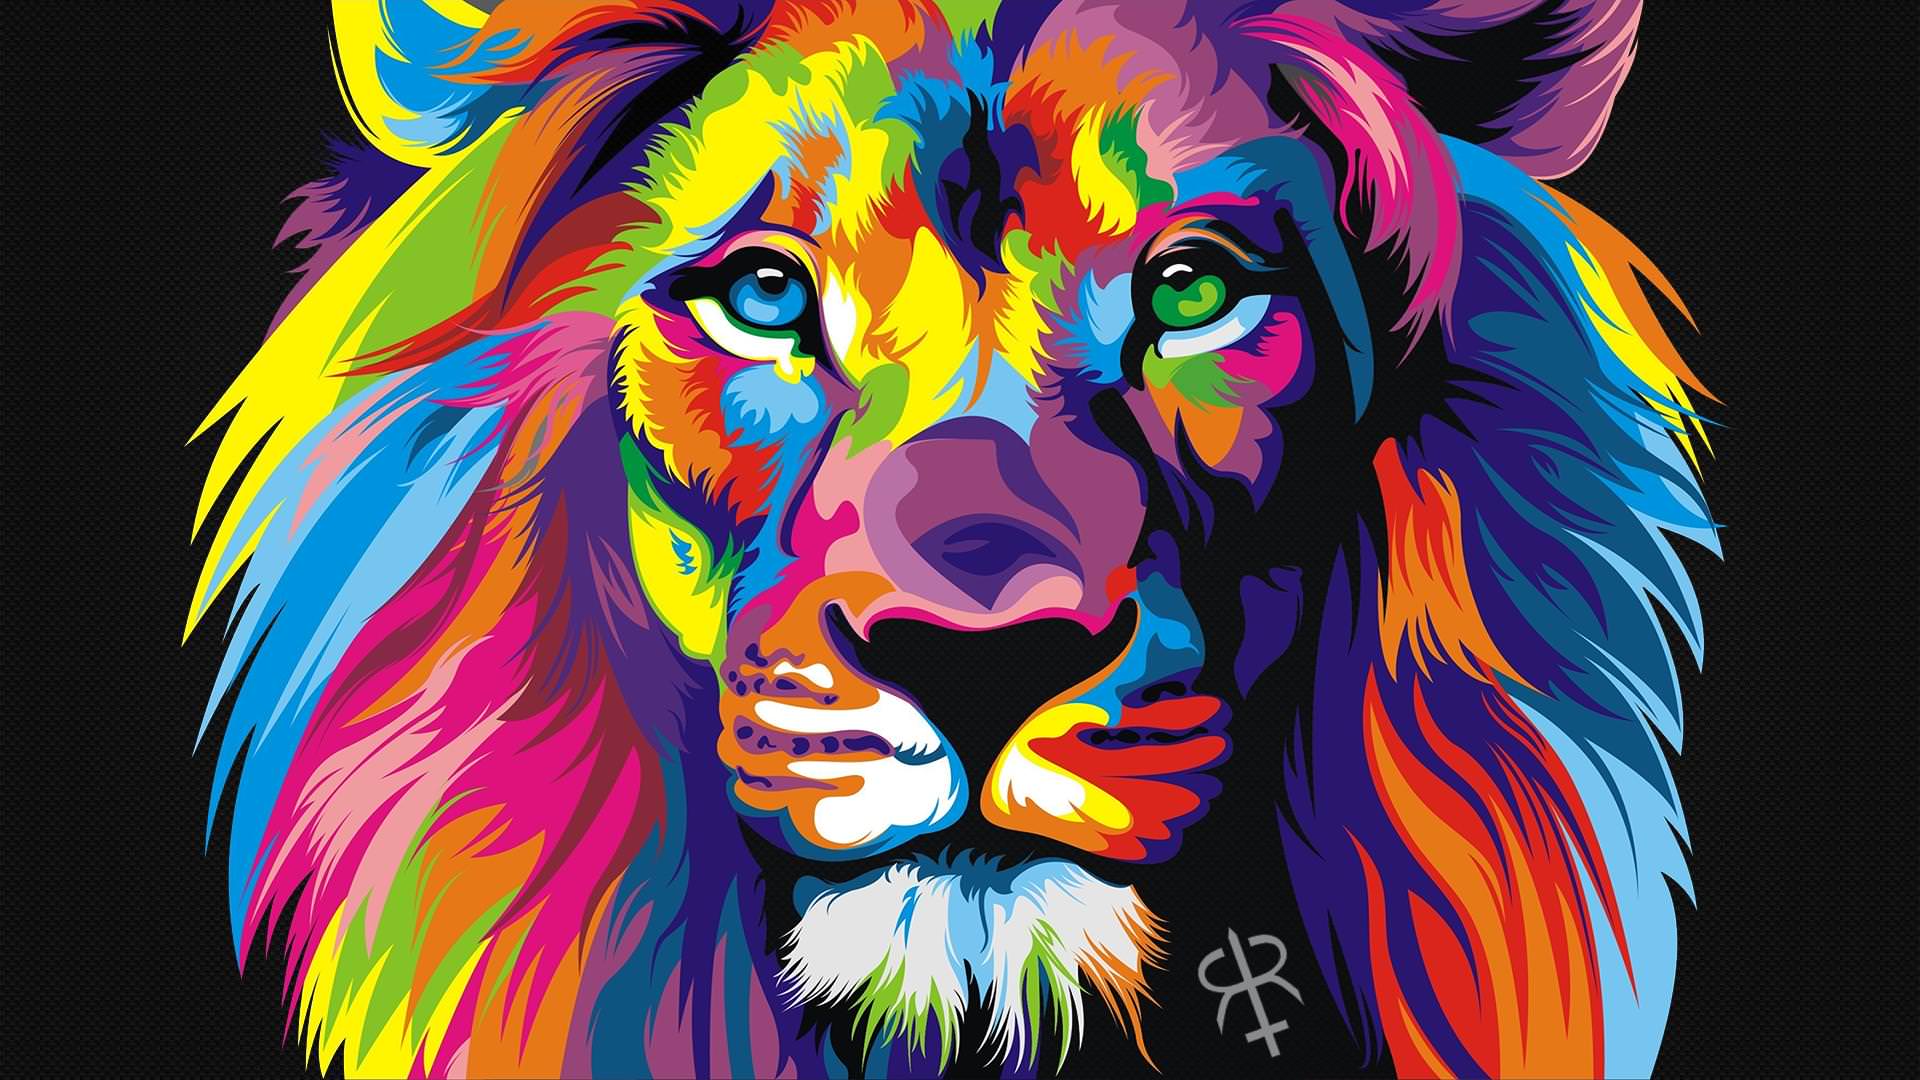 Cool Lion Galaxy Wallpapers